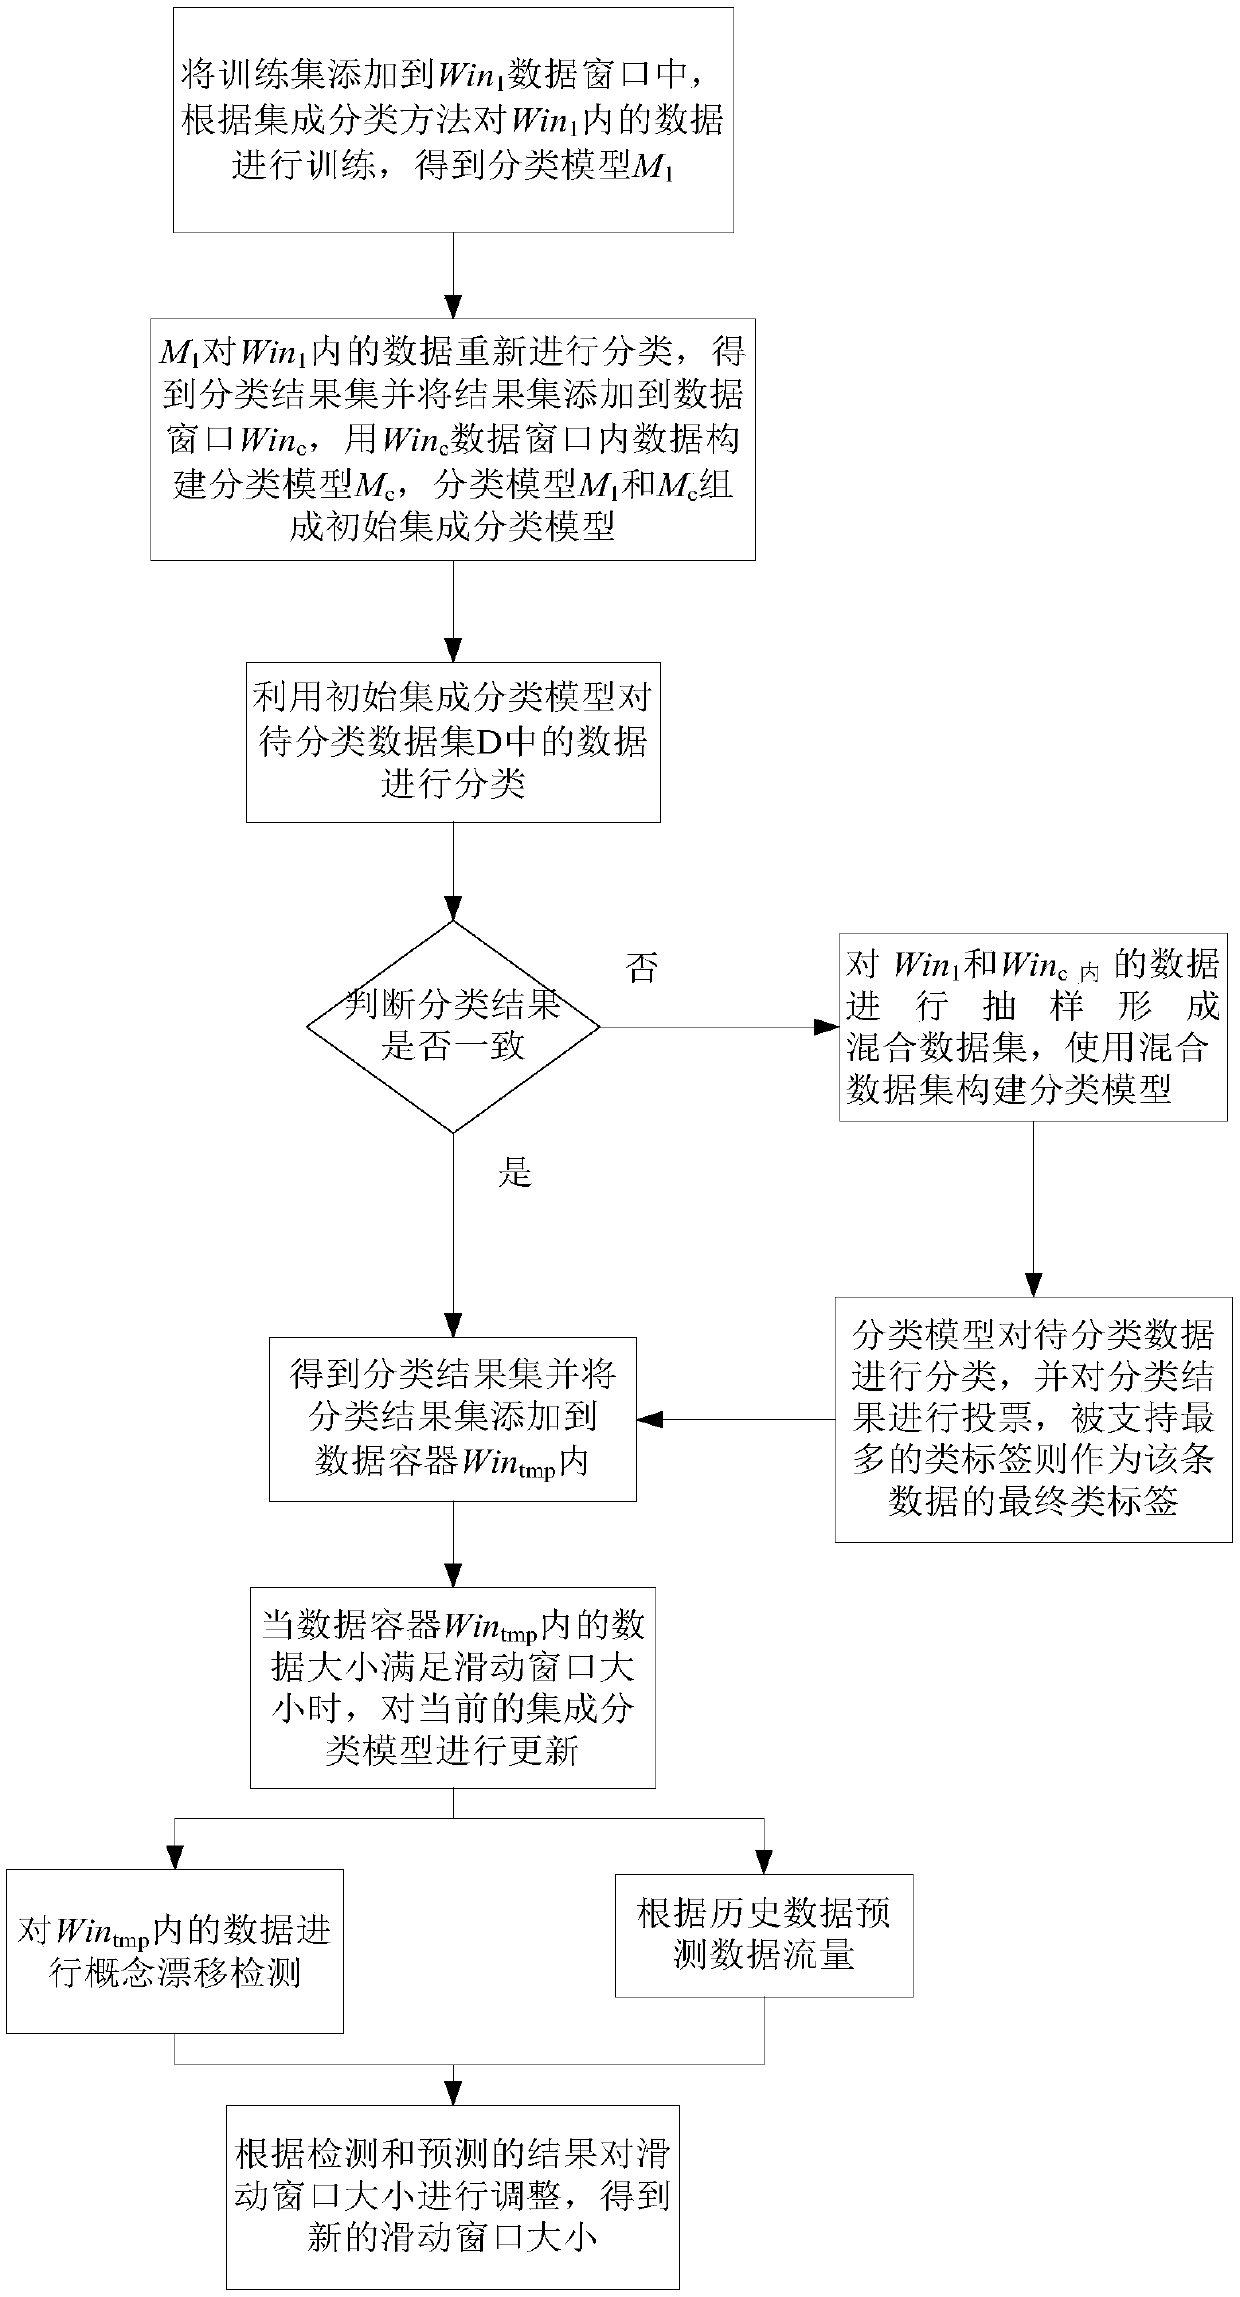 Streaming data classification method based on decision tree